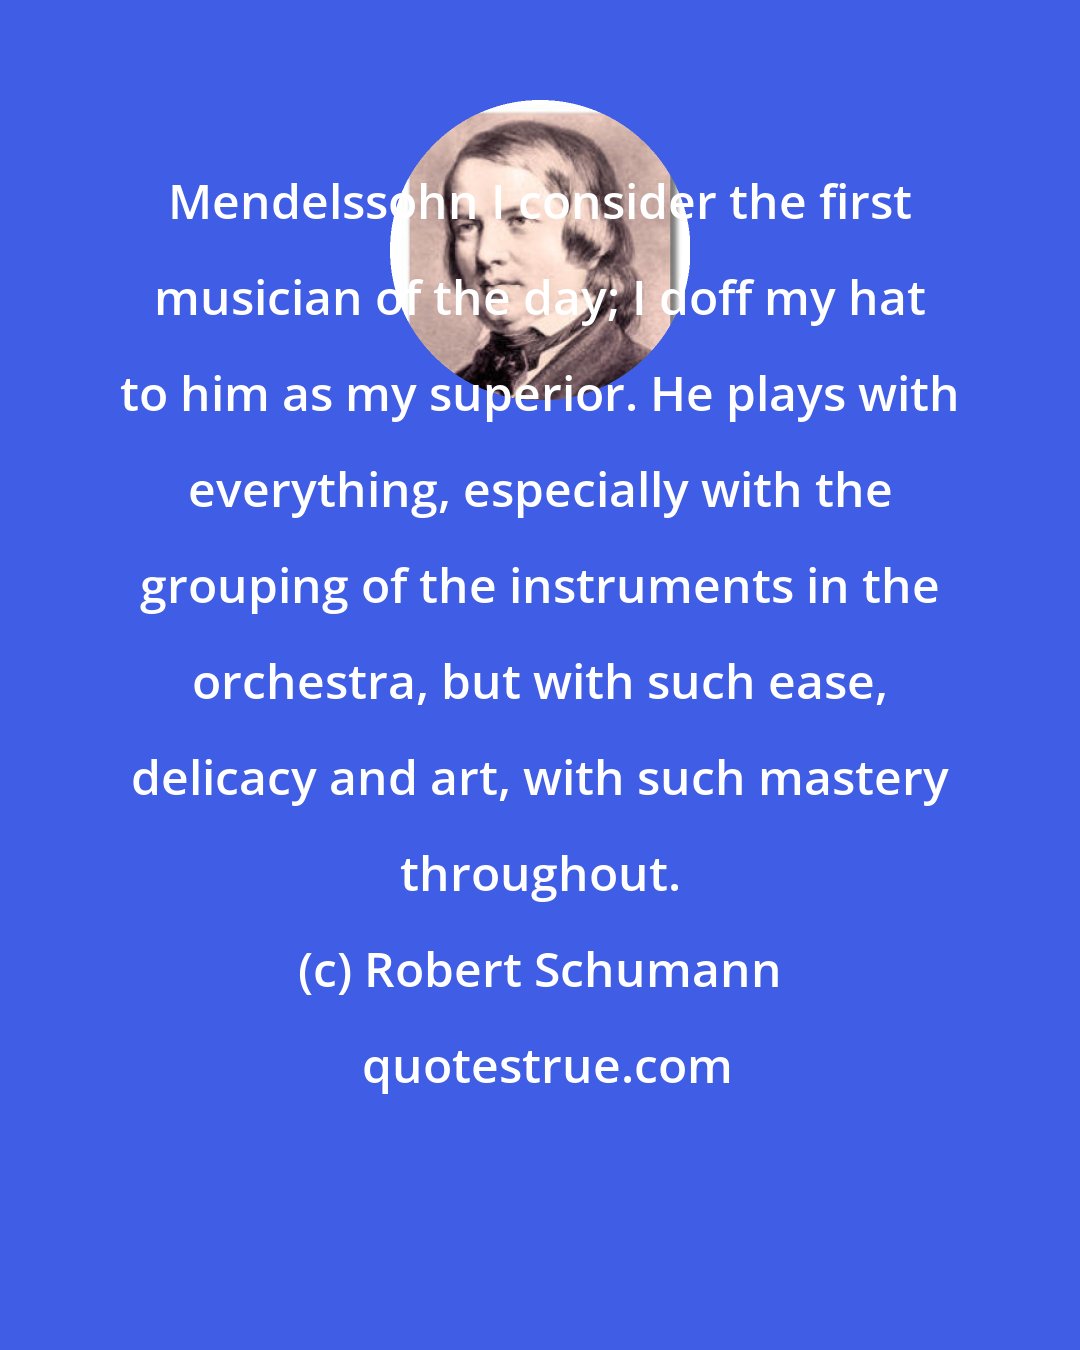 Robert Schumann: Mendelssohn I consider the first musician of the day; I doff my hat to him as my superior. He plays with everything, especially with the grouping of the instruments in the orchestra, but with such ease, delicacy and art, with such mastery throughout.